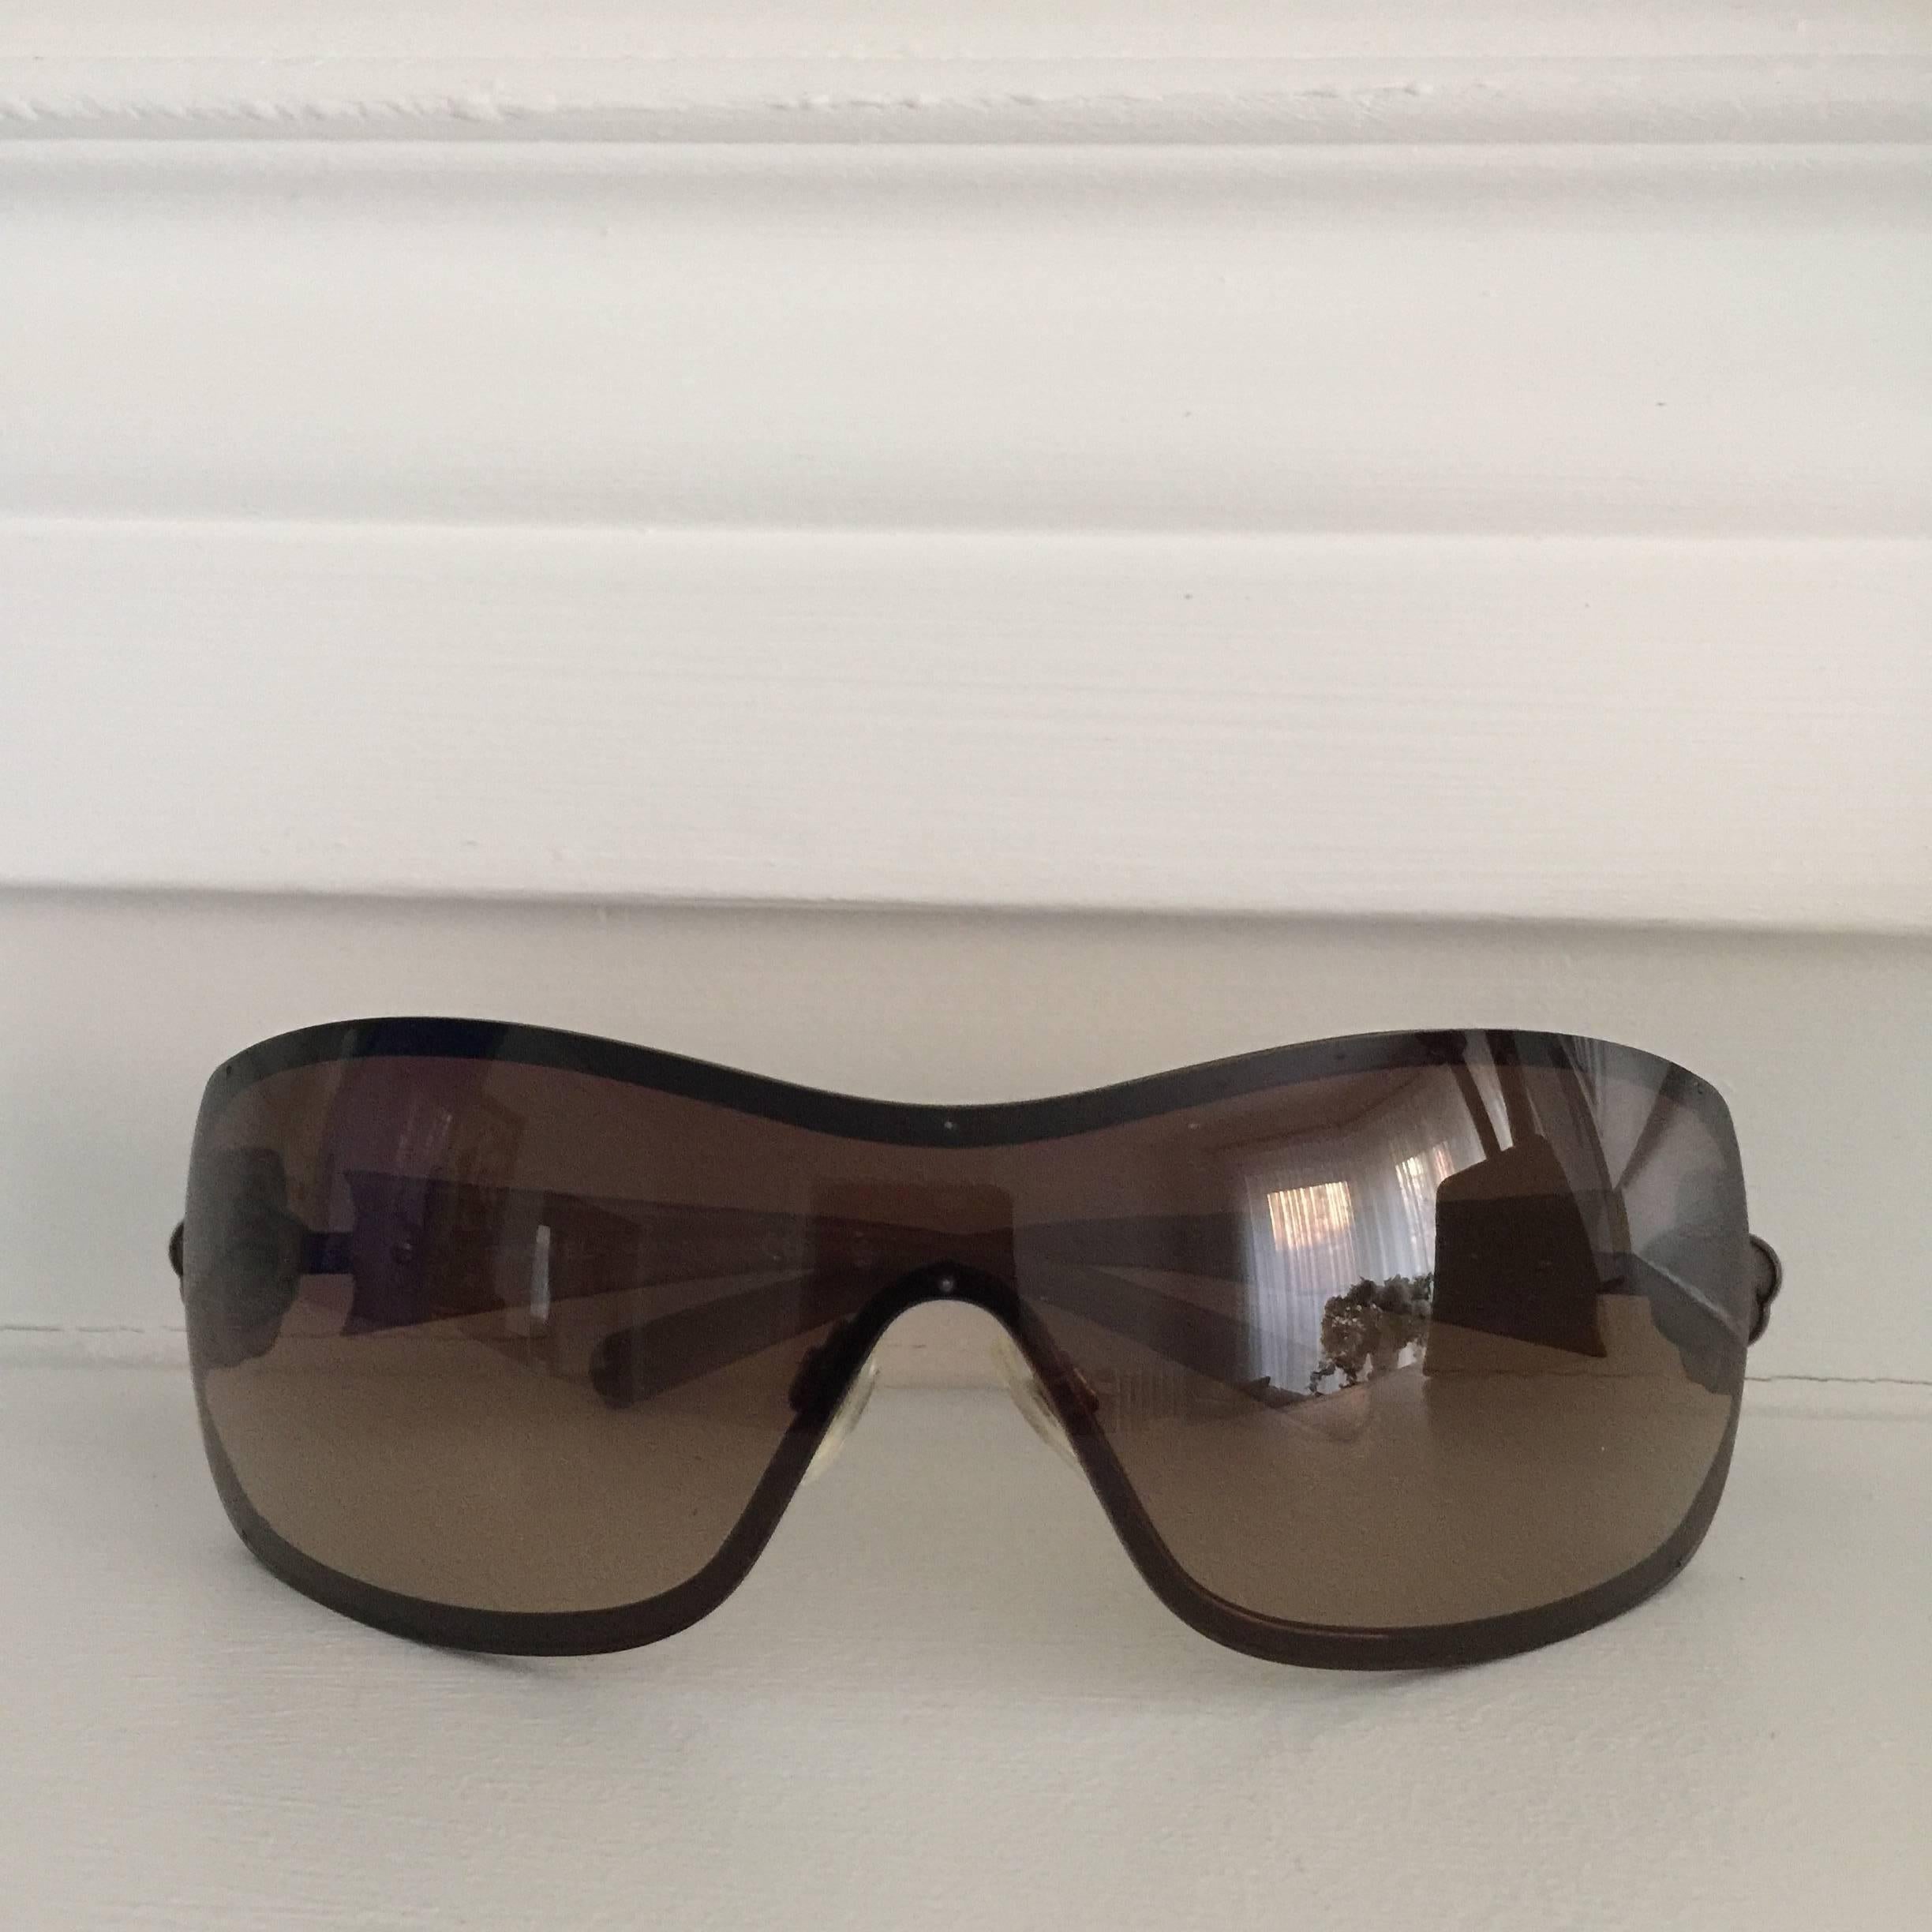 These Ultra-Chic Chanel sunglasses are in one piece 
large lens... in dark amber/mauve.... set amidst a silver frame 
. The arms are wide and feature a Camelia stylized
flower set with Swarovki Crystals and a silver Chanel
logo in the